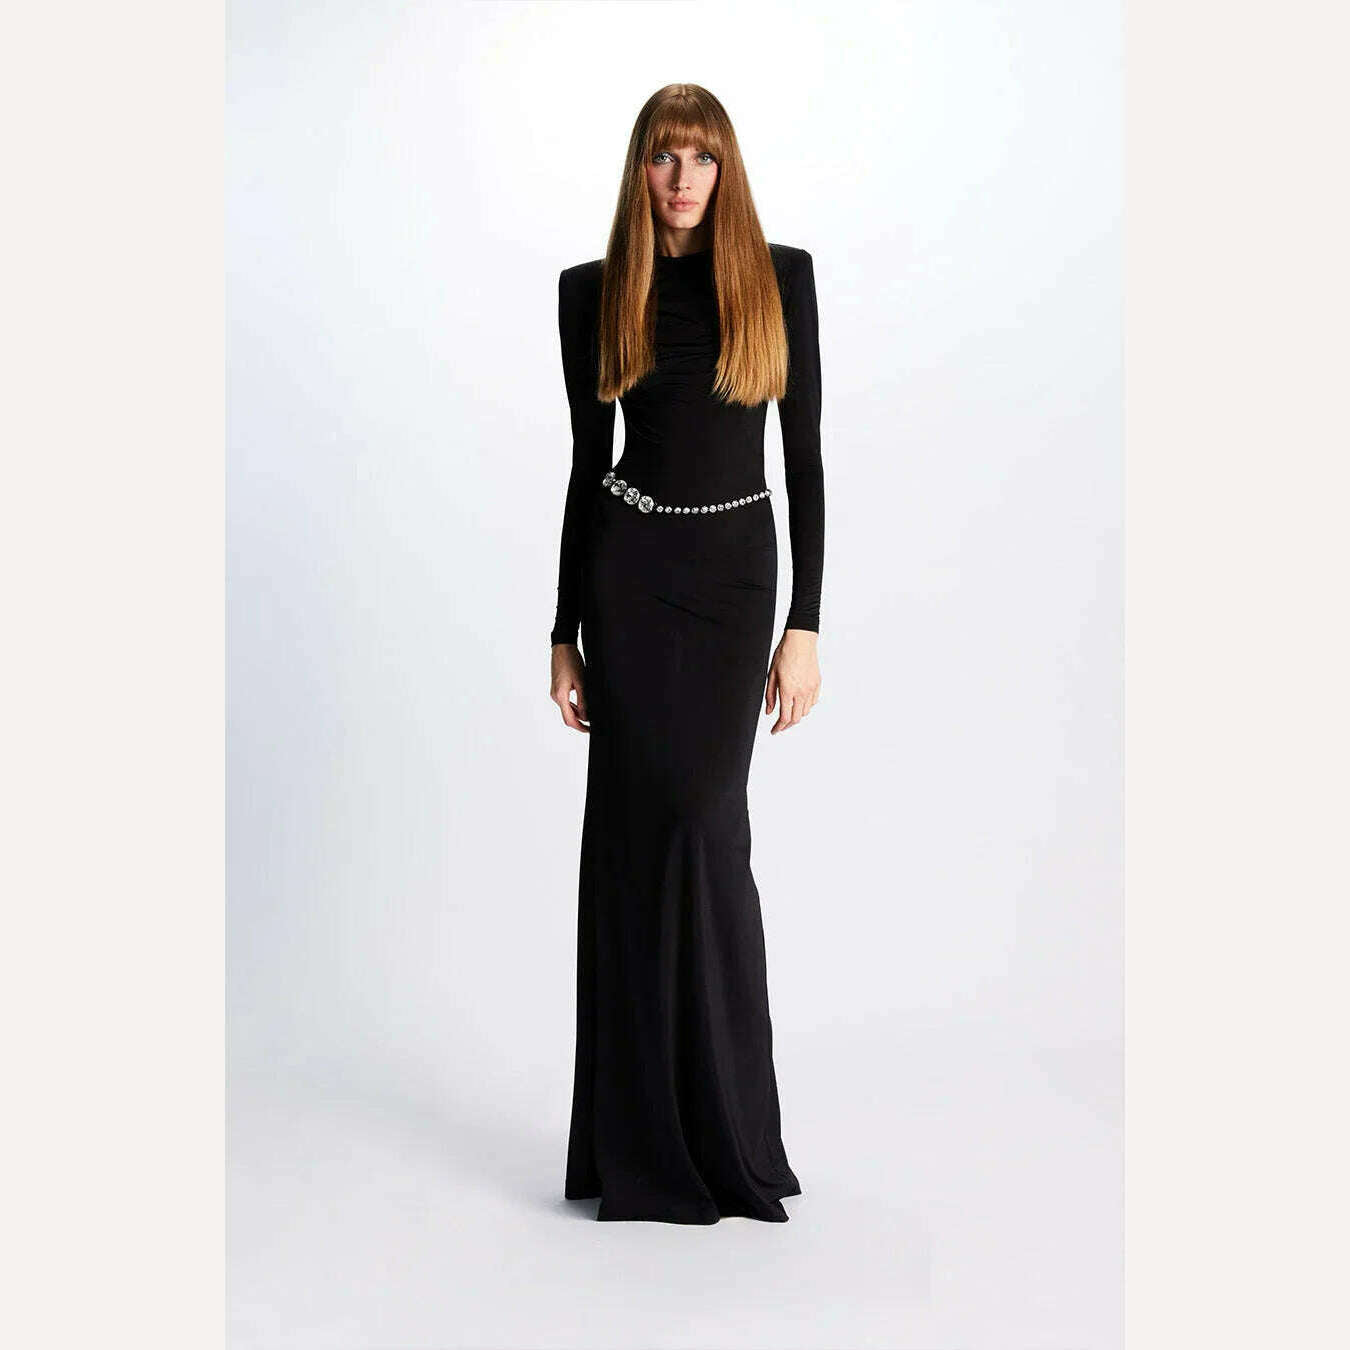 KIMLUD, Shining Diamonds Waist Chain Sexy Backless Black Long Bandage Dress Elegant Woman Evening Party Dress Cocktail Party Outfit, KIMLUD Womens Clothes